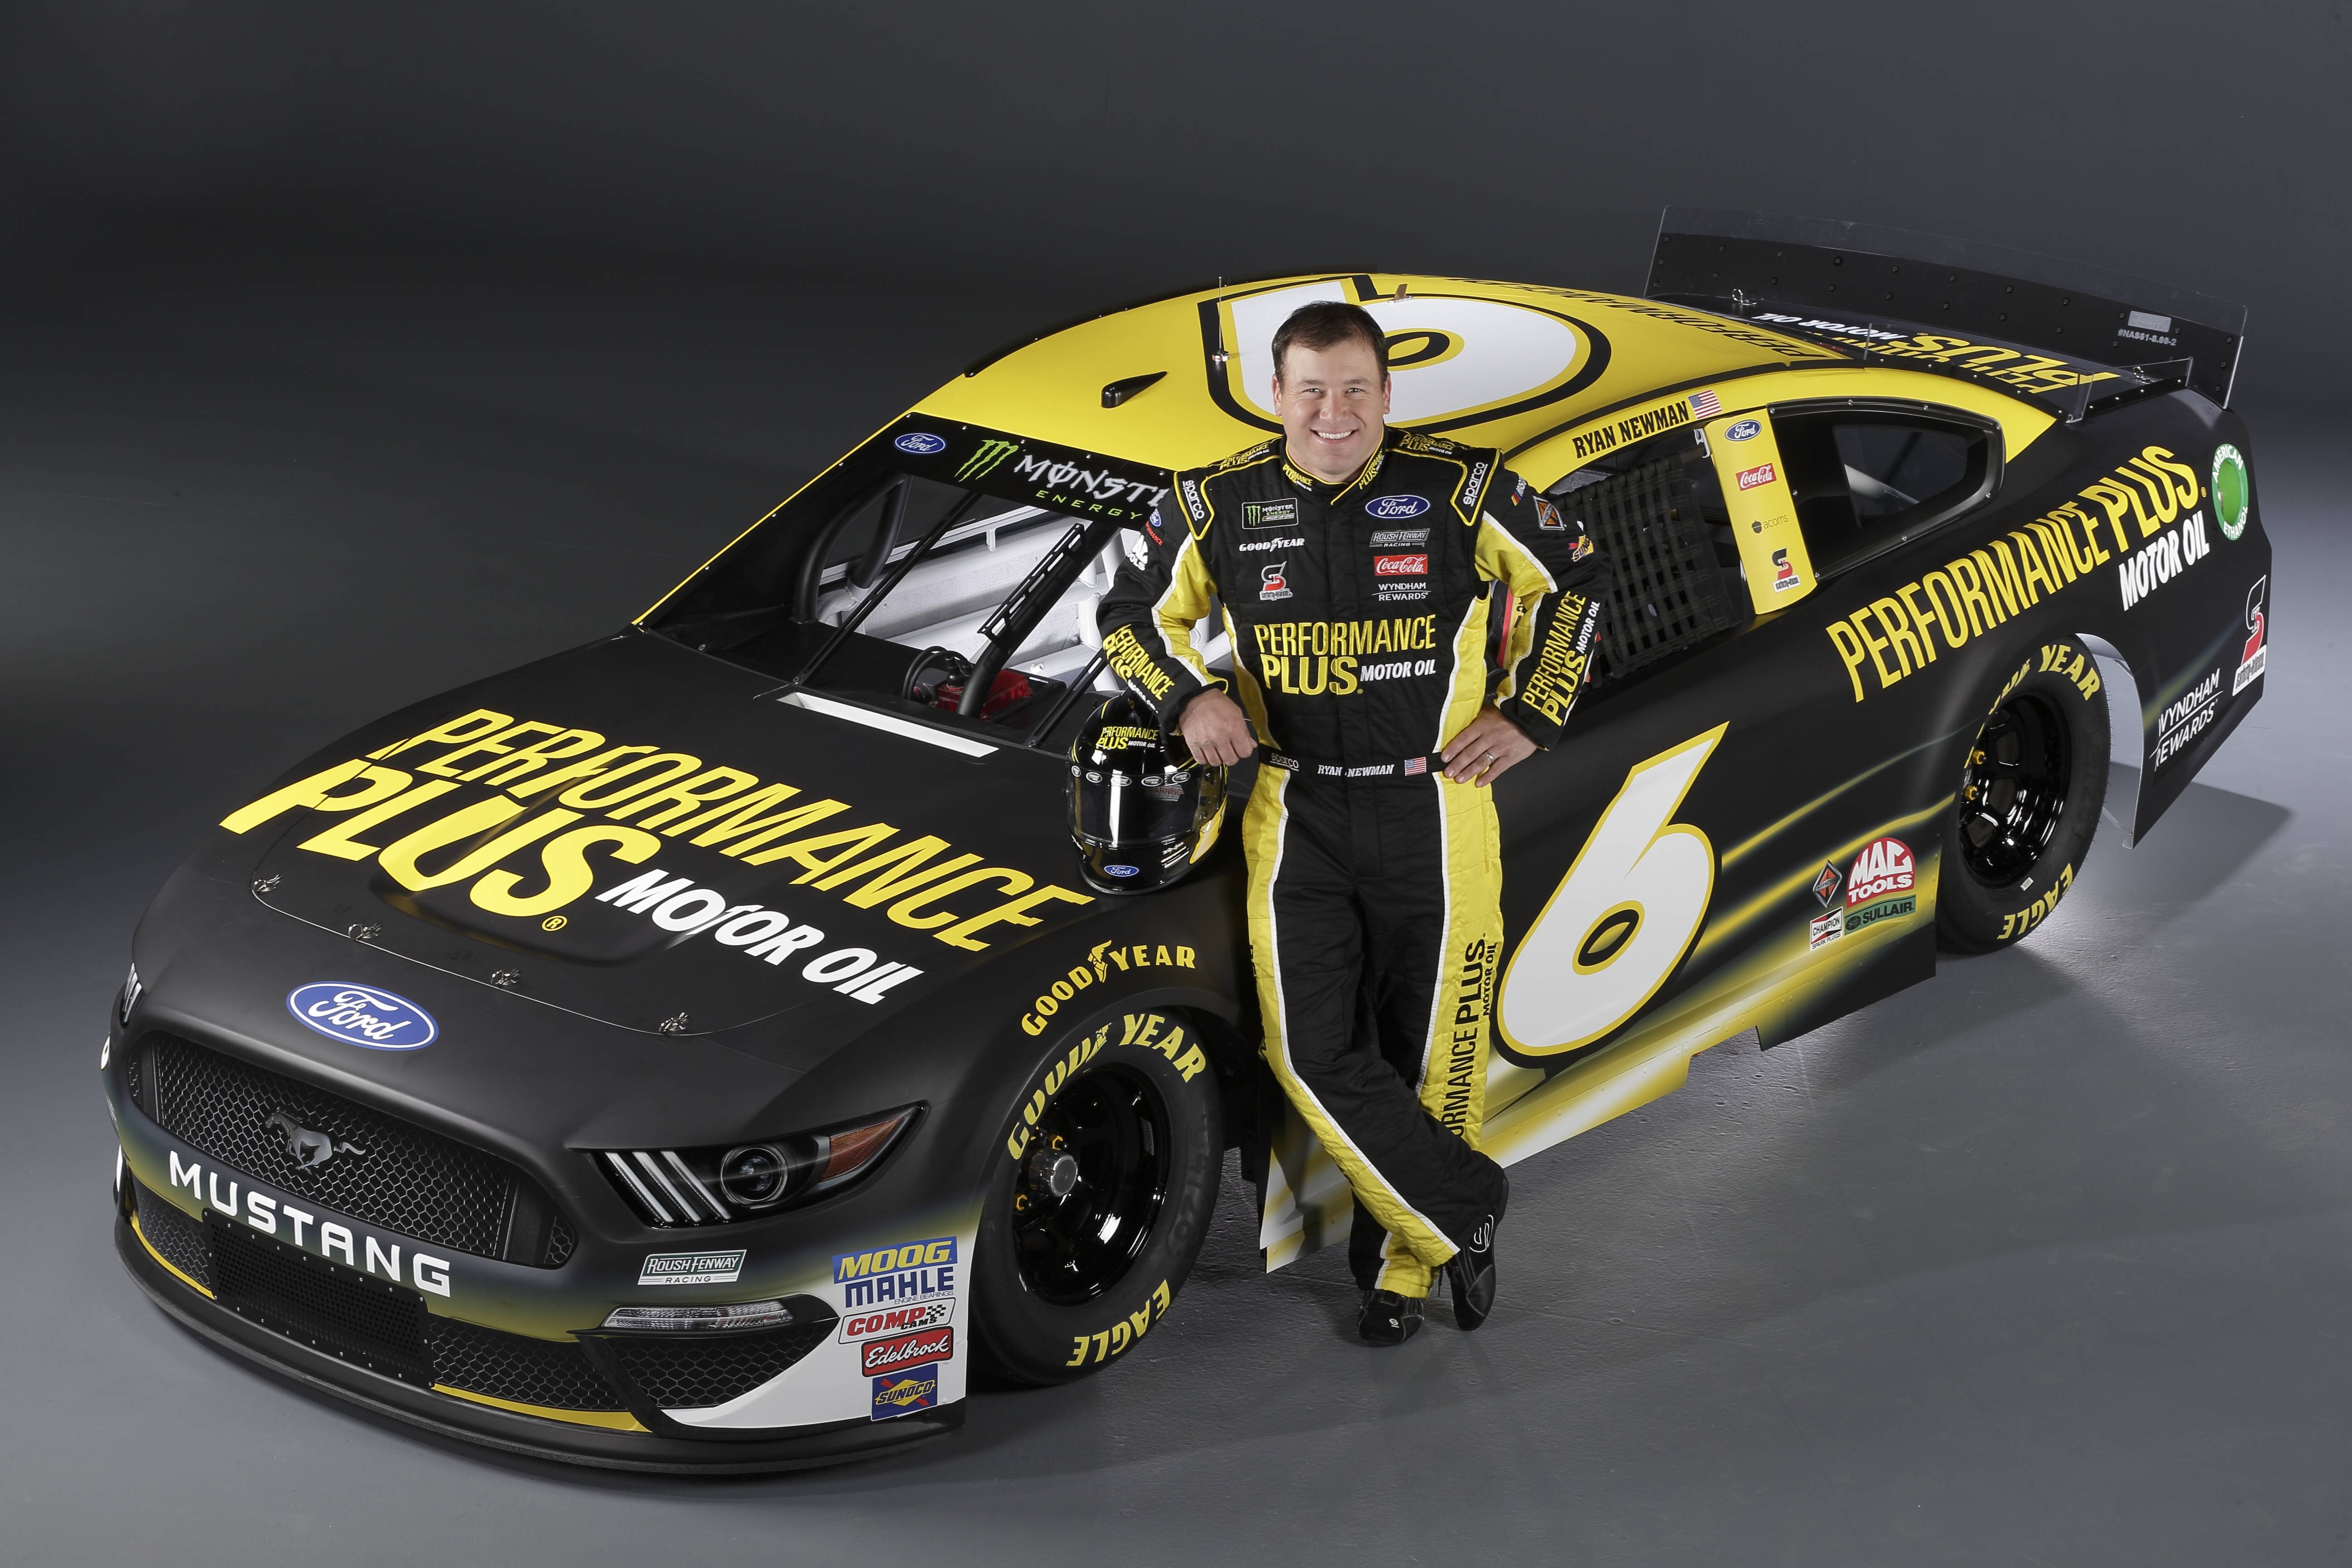 Motor Black and Yellow Logo - Newman to Sport Performance Plus Motor Oil Black and Yellow in 2019